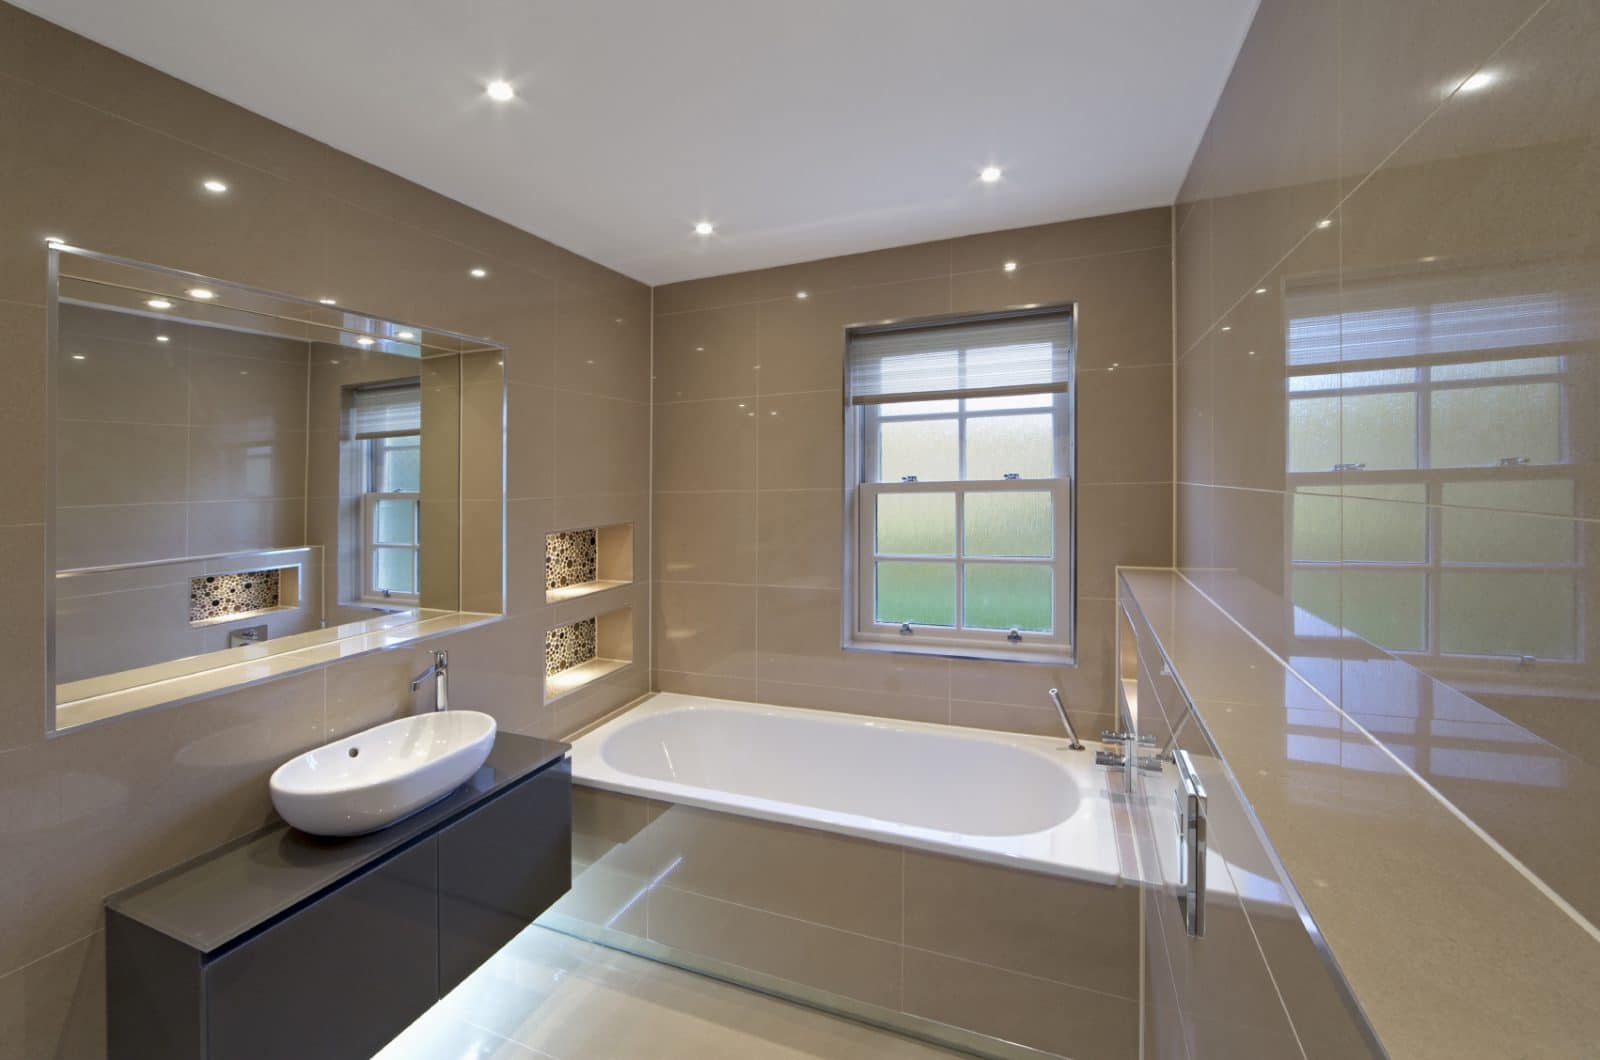 Bathroom Fitting Costs Homeforce, How Much Does It Cost To Replace A Bathroom Uk